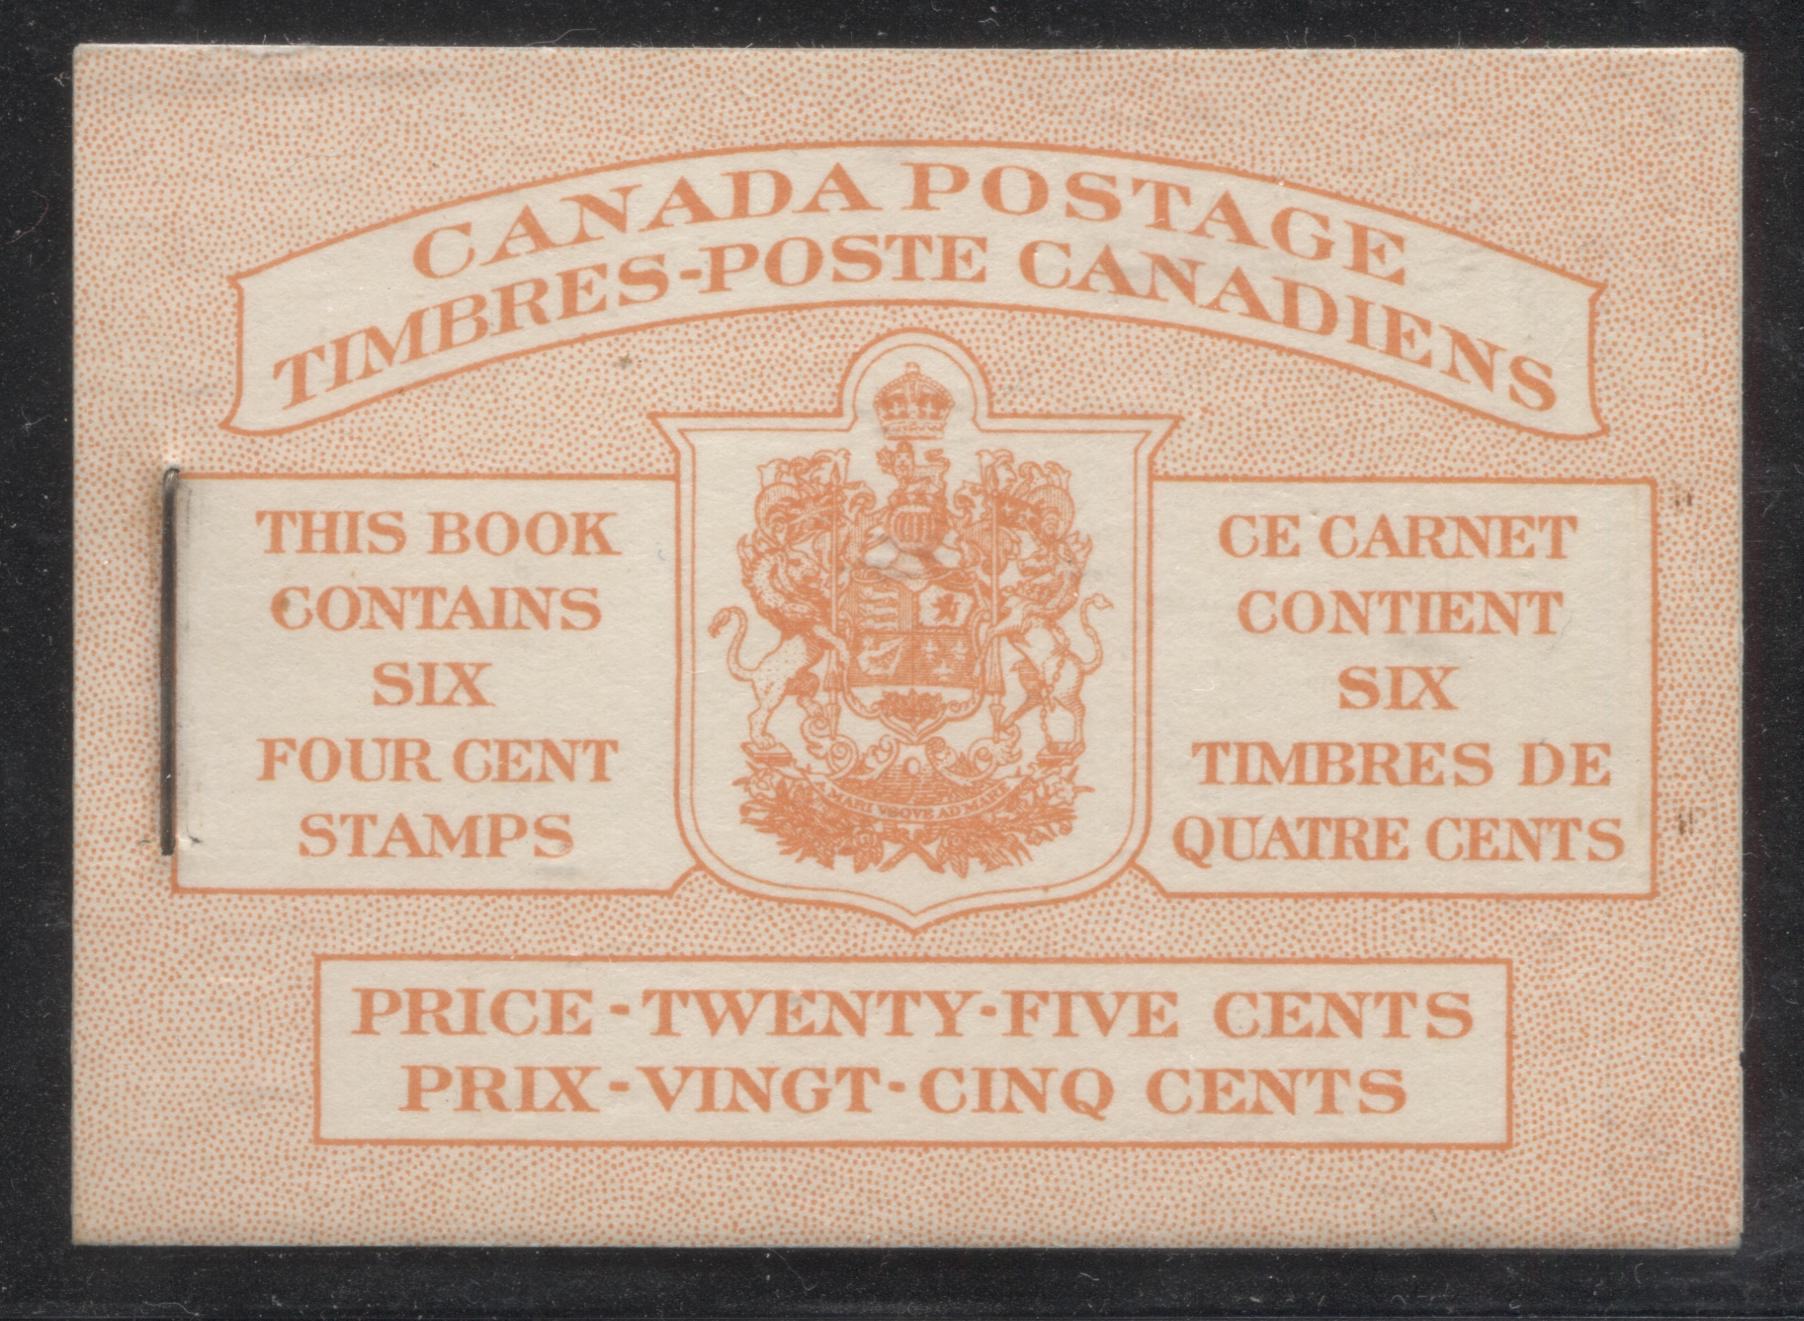 Canada #BK42a 1949-1953 Postes-Postage Issue Complete 25c, Bilingual Booklet Containing 1 Pane of 6 of the 4c Orange King George VI Harris Front Cover Type IIIf , Back Cover Gii, No Rate Page Brixton Chrome 